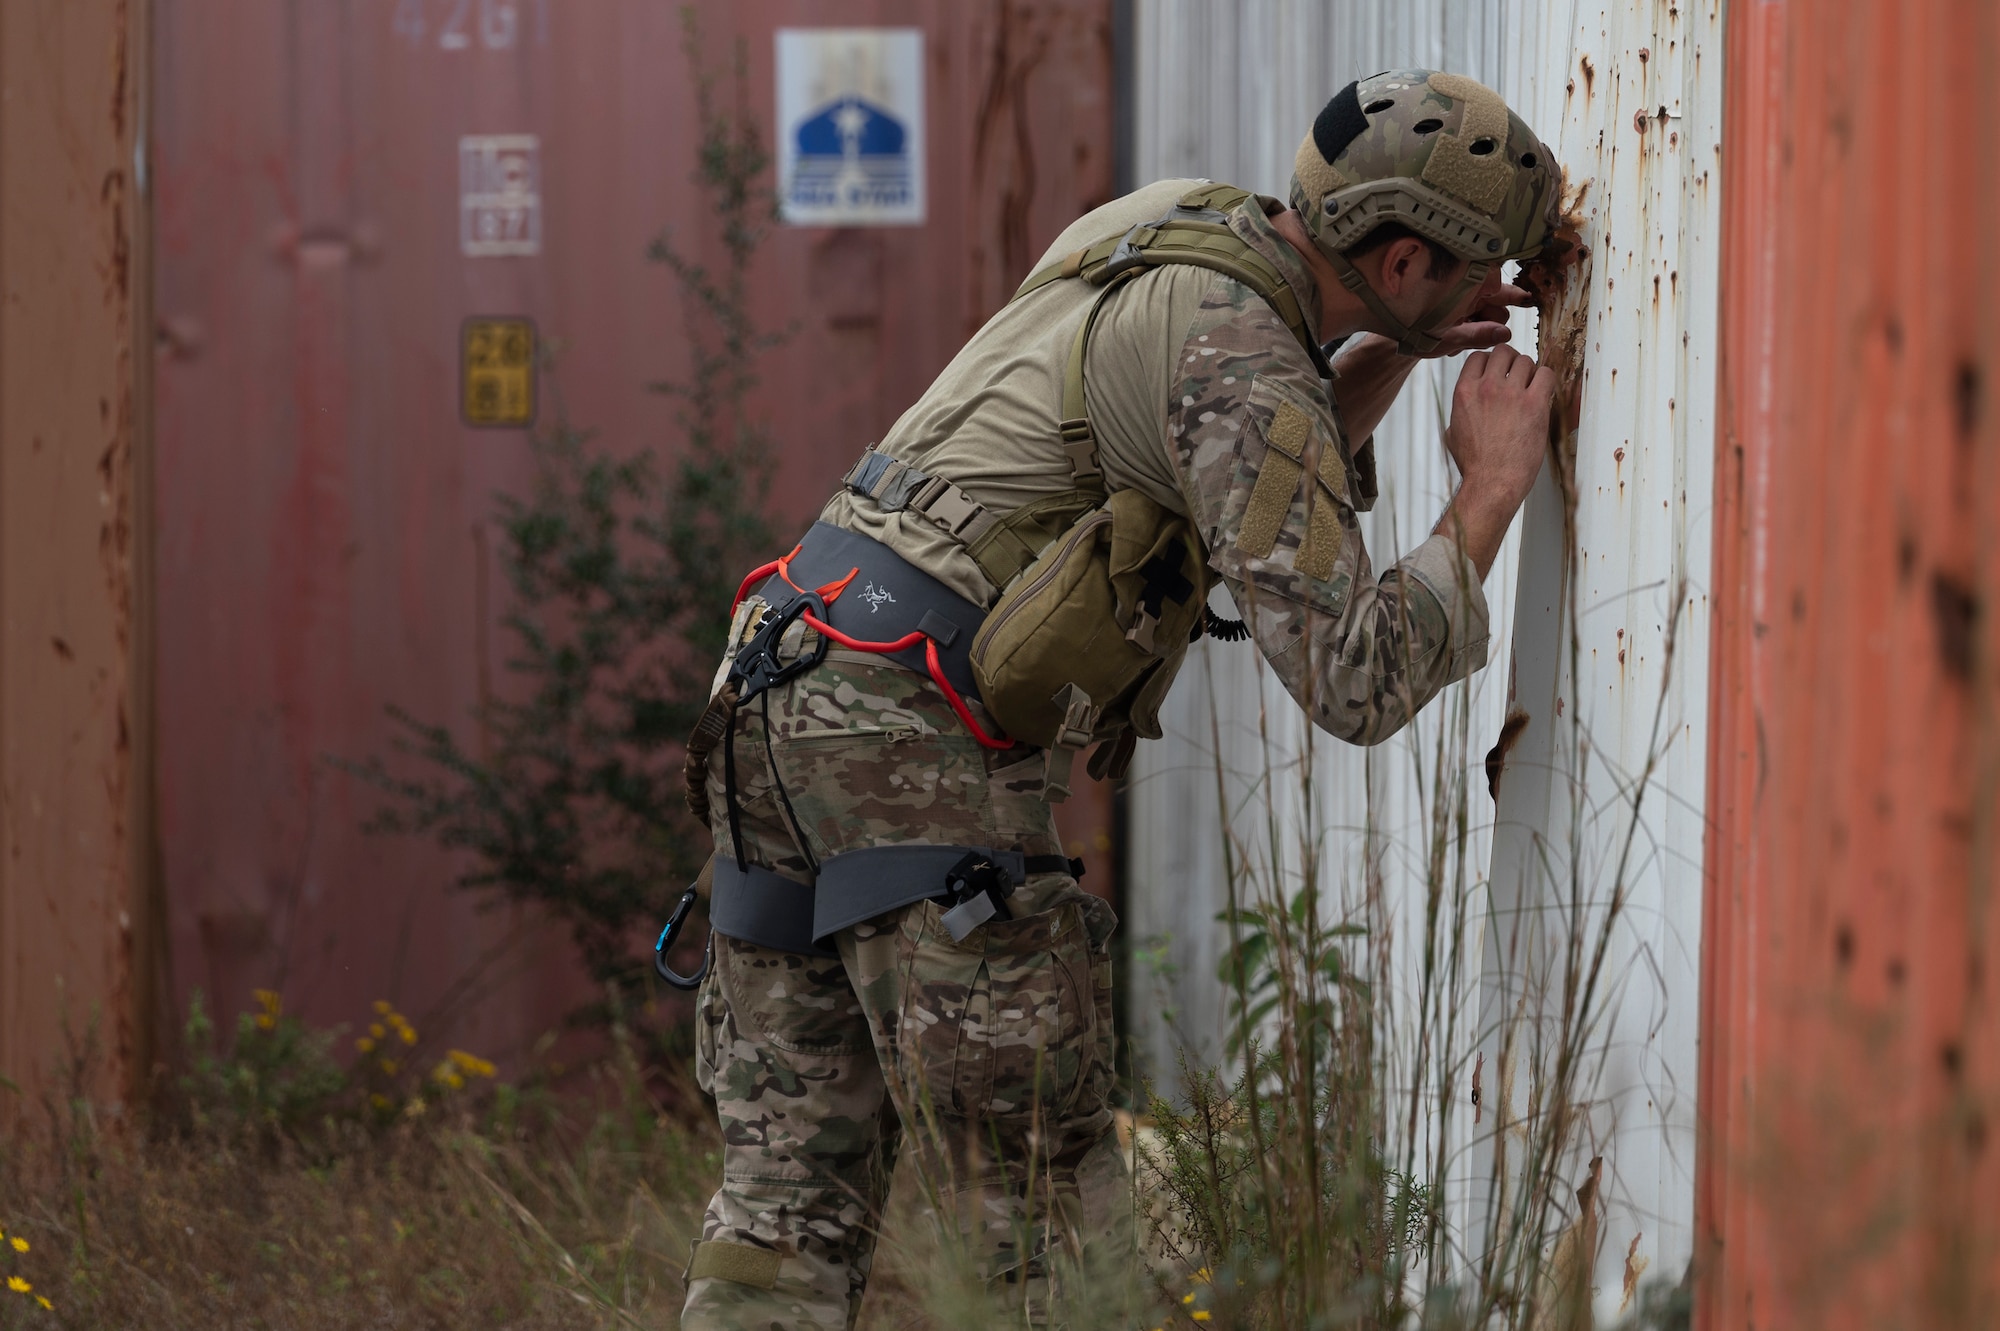 We look at the side of a Special Tactics Operator as he leans over with his helmet against a corrugated metal wall as he looks for injured civilians through a hole in the wall.